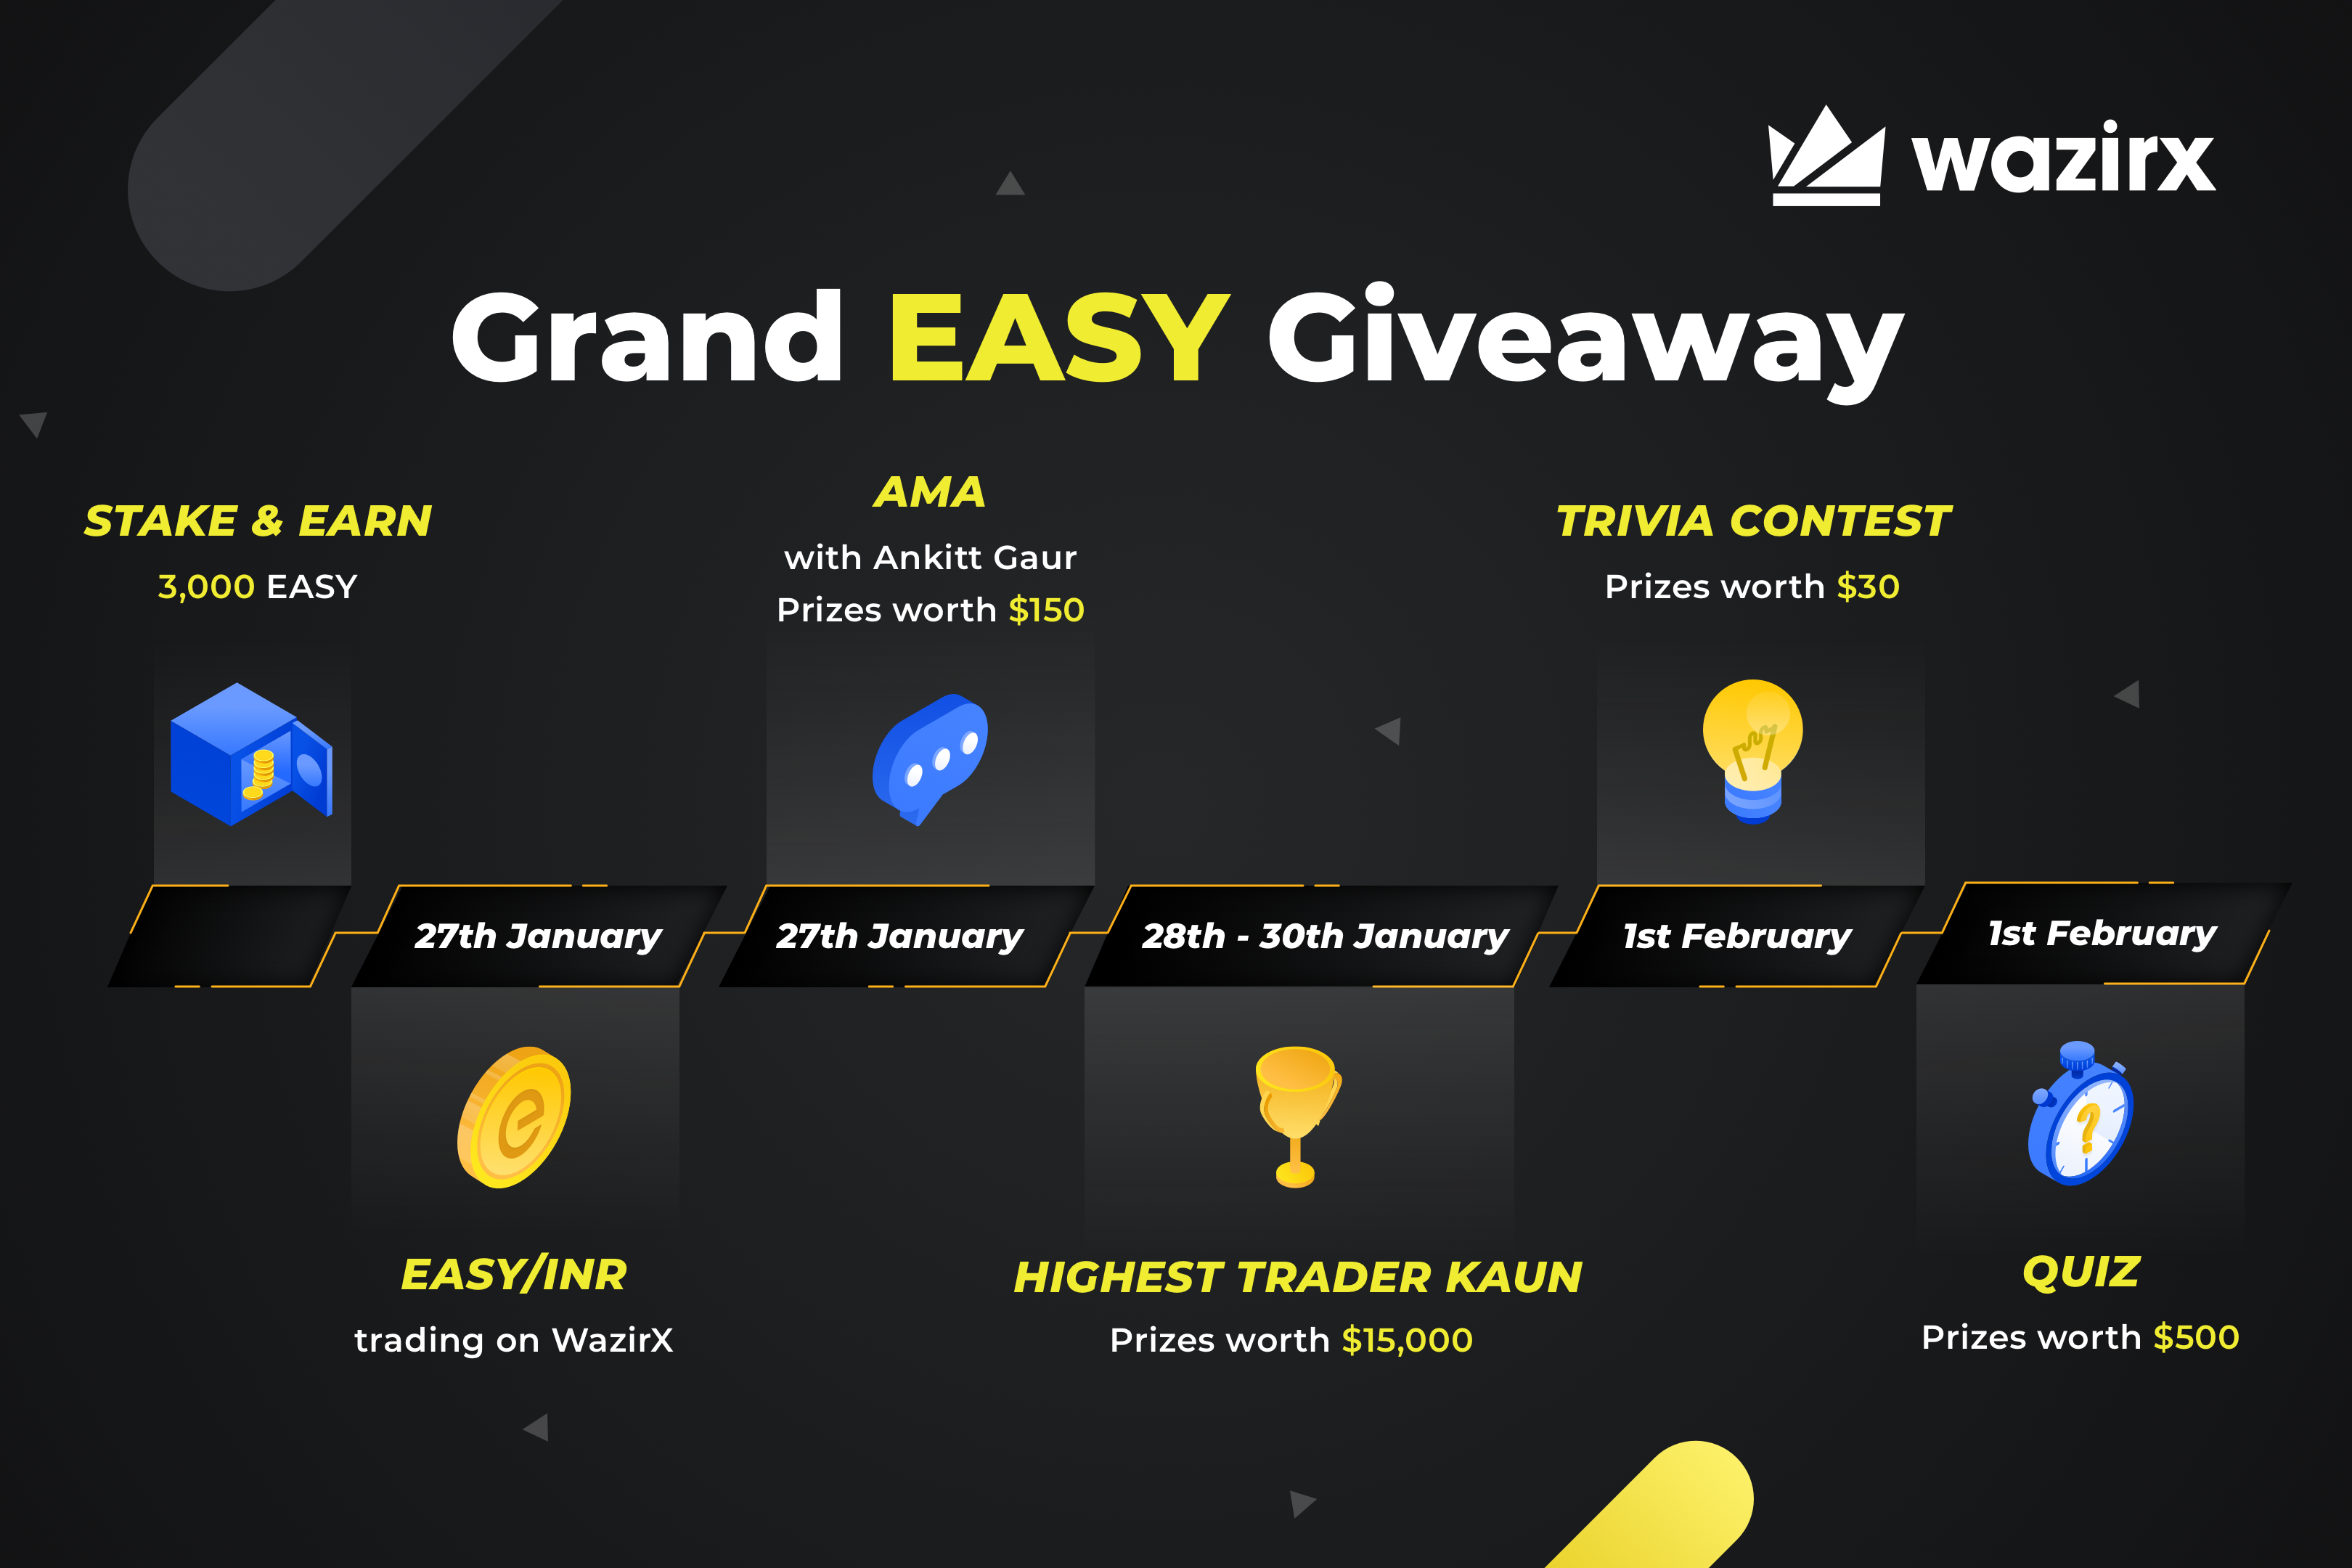 Grand EASY Giveaway